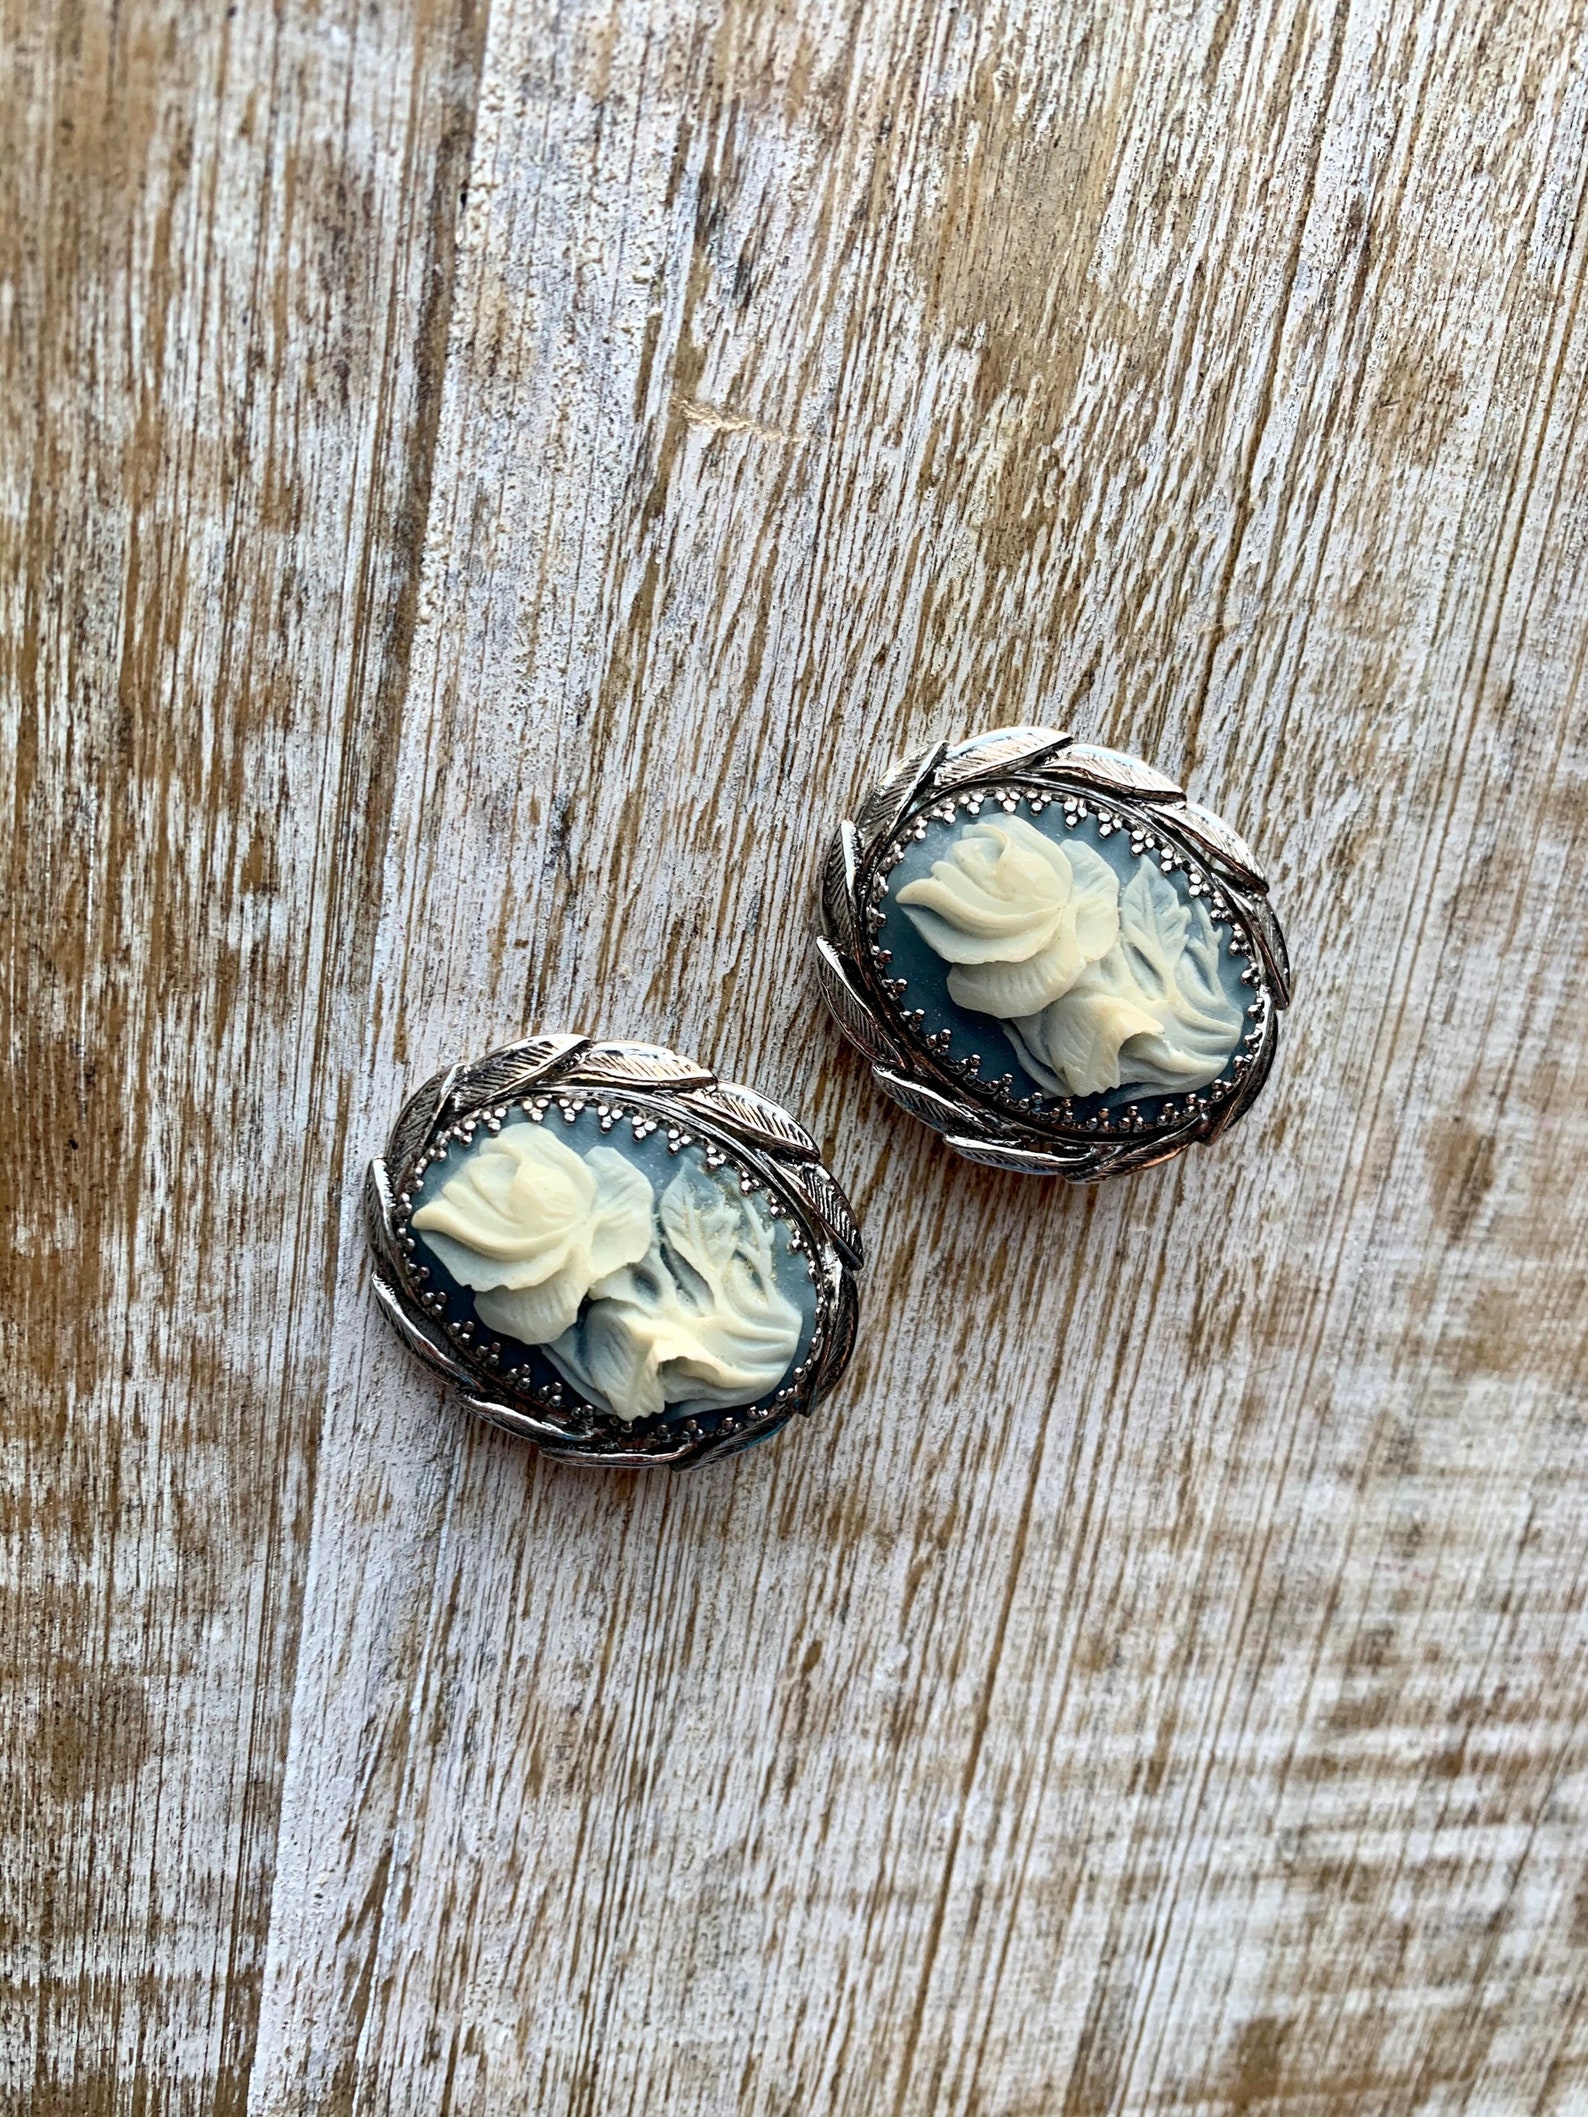 Vintage Whiting & Davis Co Clip on Cameo Rose Earrings Silver | Etsy